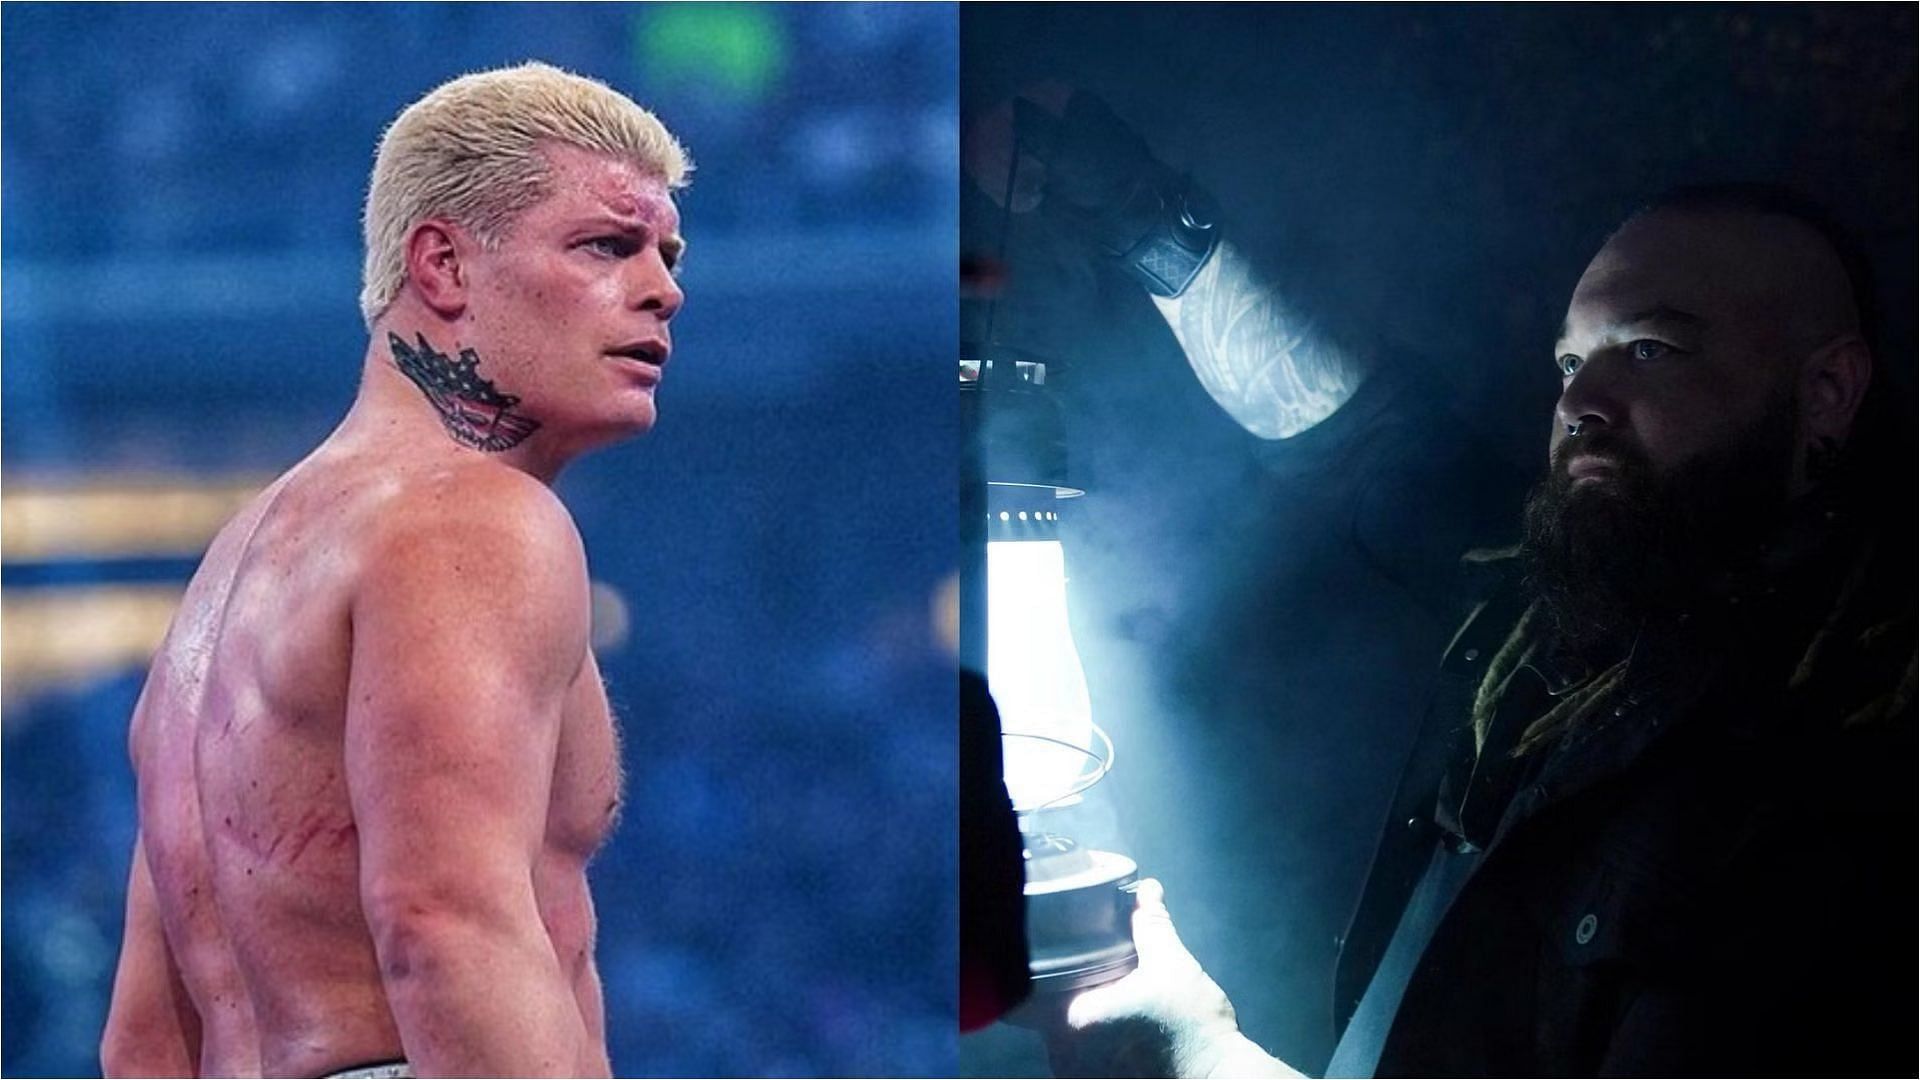 WWE&#039;s brightest babyface vs. its darkest character; the ultimate battle between good and evil